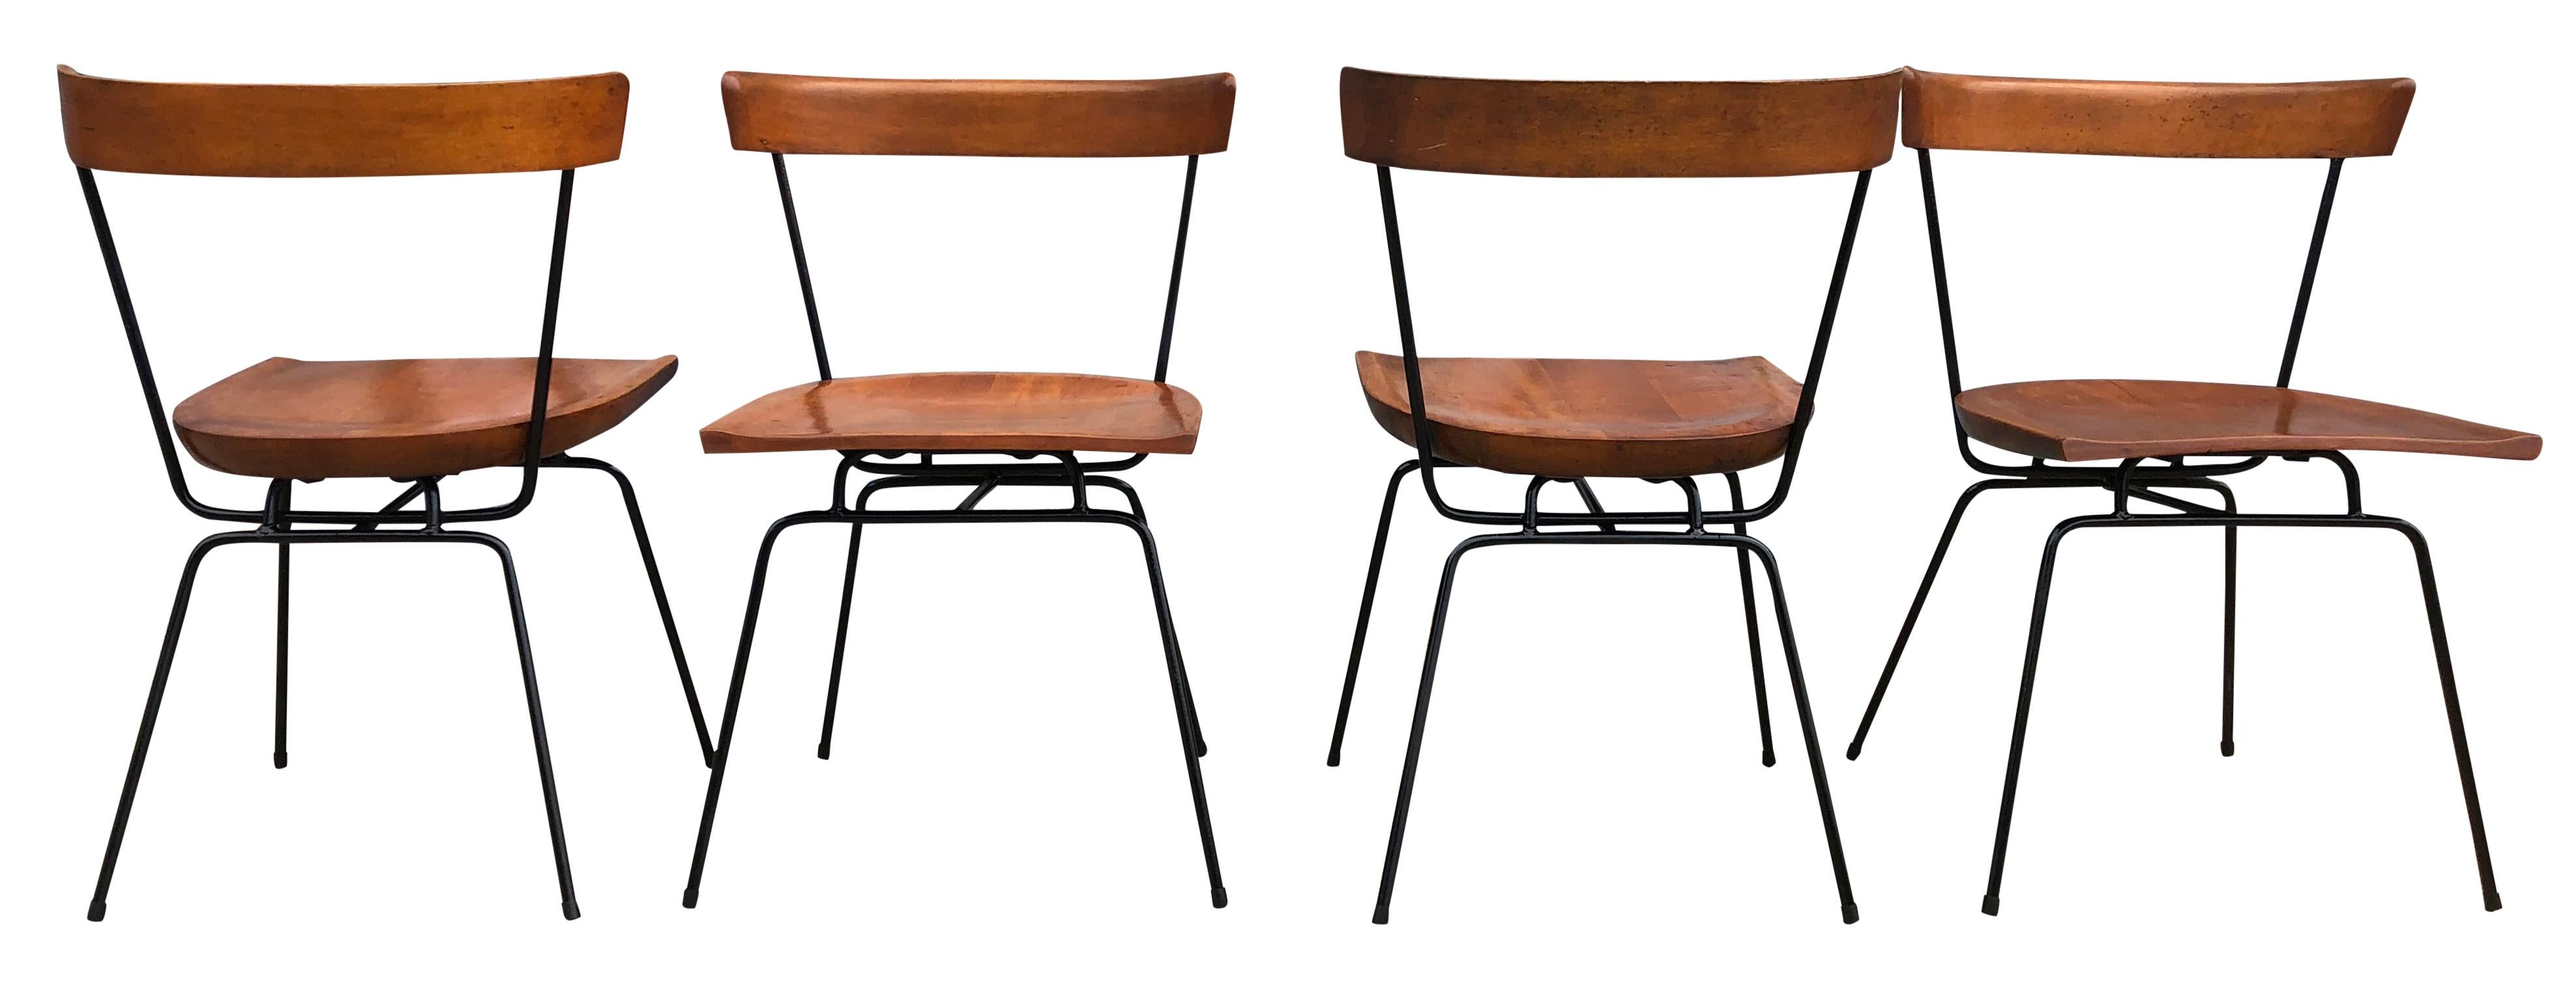 Rare 4 Midcentury Paul McCobb Planner Group Dining Chairs #1535 Maple Iron In Good Condition In BROOKLYN, NY